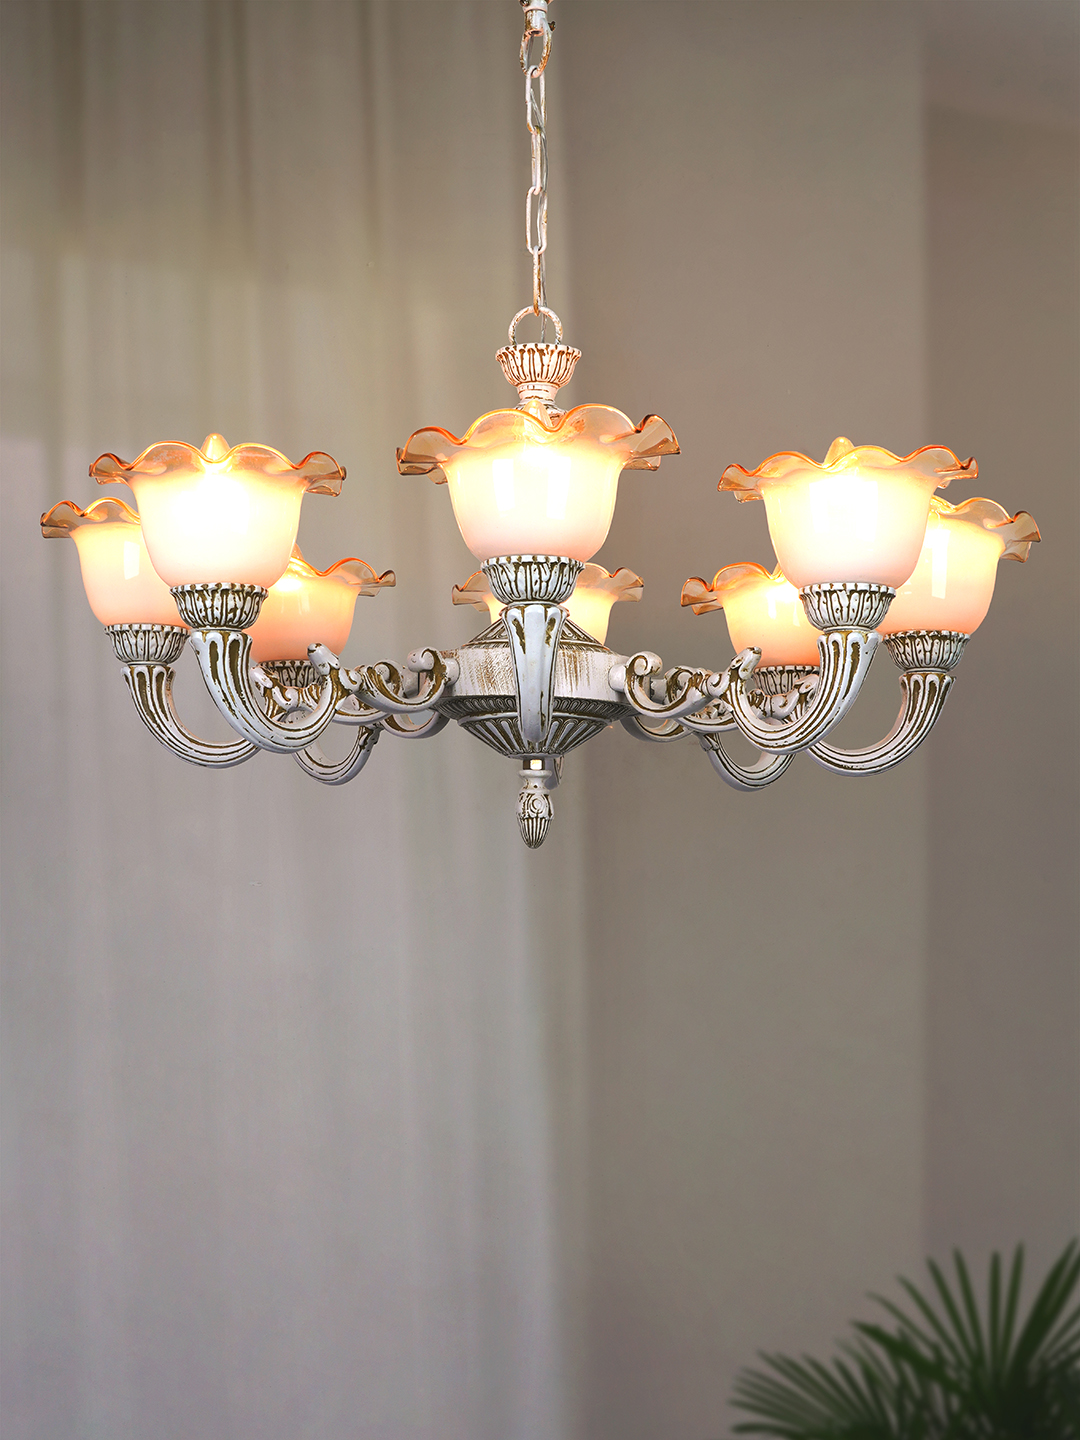 Rustic Distressed White 8-Light Aluminium Chandelier With Floral Glass Shades